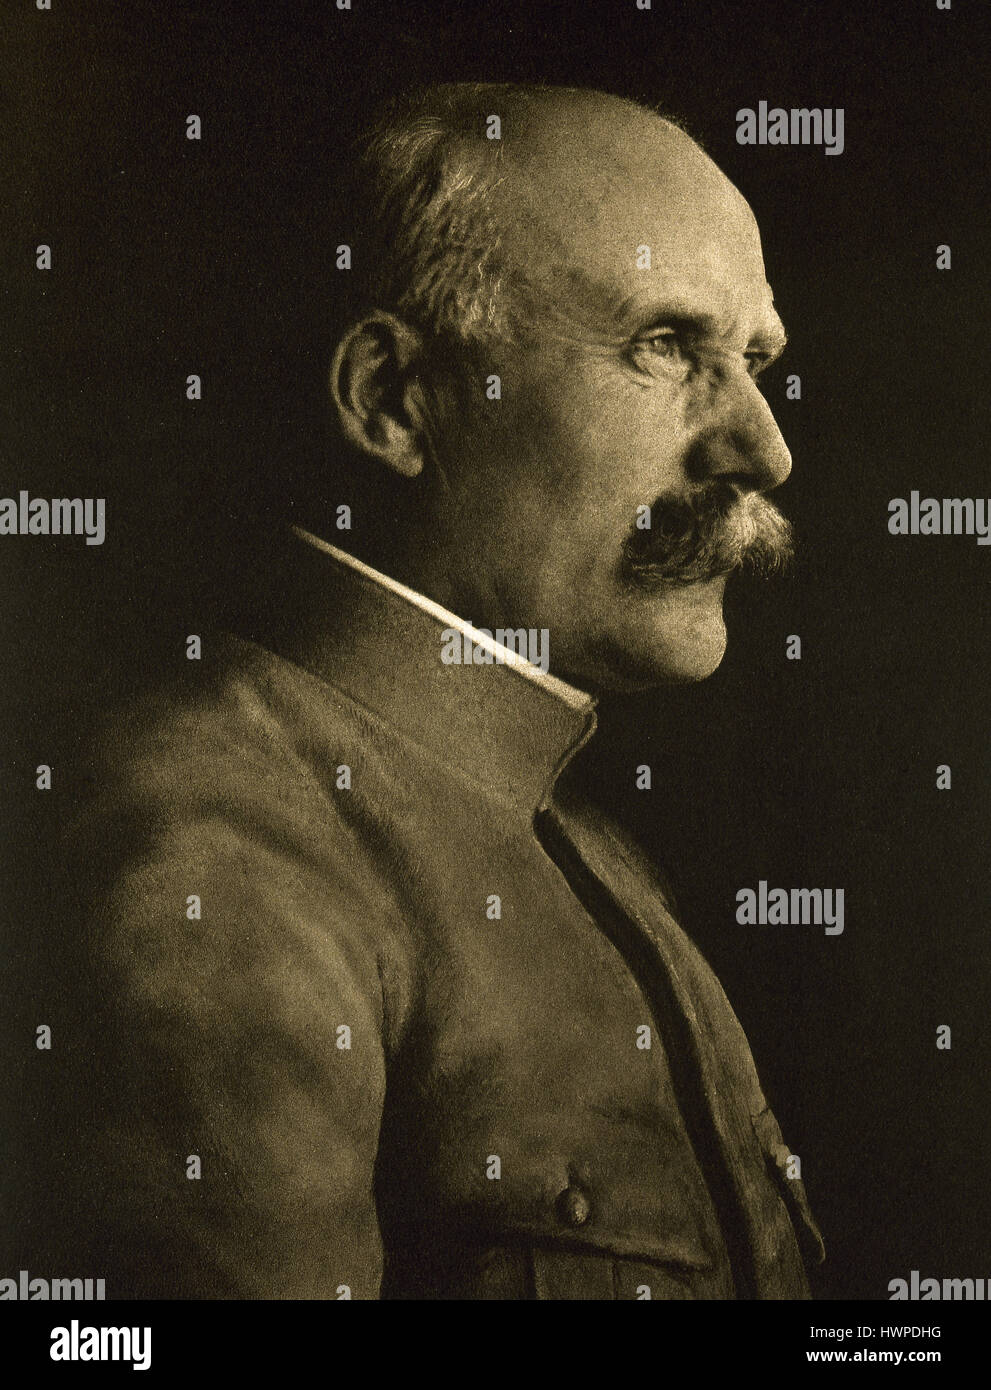 Philippe Petain (1856-1951). French general who reached the distinction of Marshal of France. Chief of State of Vichy France from 1940 to 1944. Portrait. 'La Ilustracion Francesa', 1917. Stock Photo